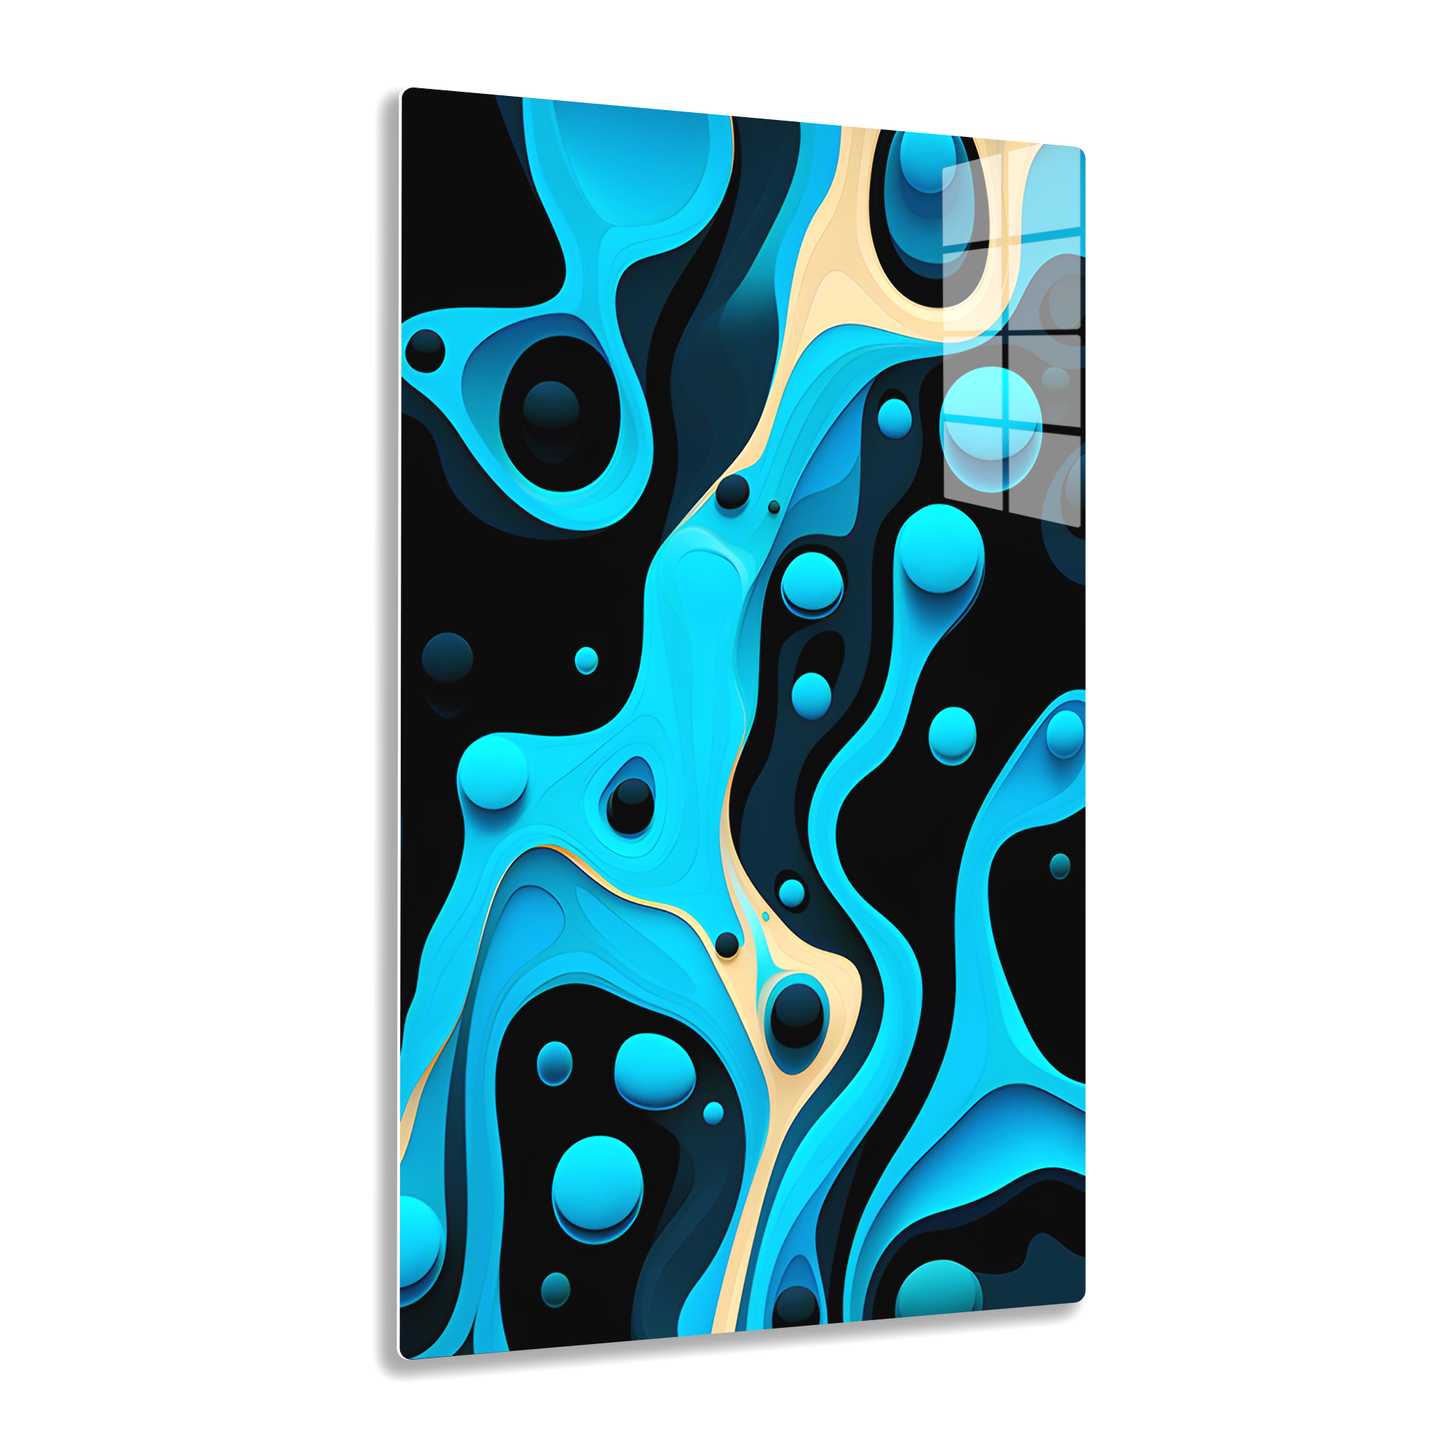 Flowing Shapes Harmony (Acrylic)Flowing Shapes Harmony Acrylic Wall Art with a Glass-Like Finish that Will Take Your Breath Away.Elevate Any Ambiance with Stellar Eye Acrylic Print🌟:Discover the bRimaGallery